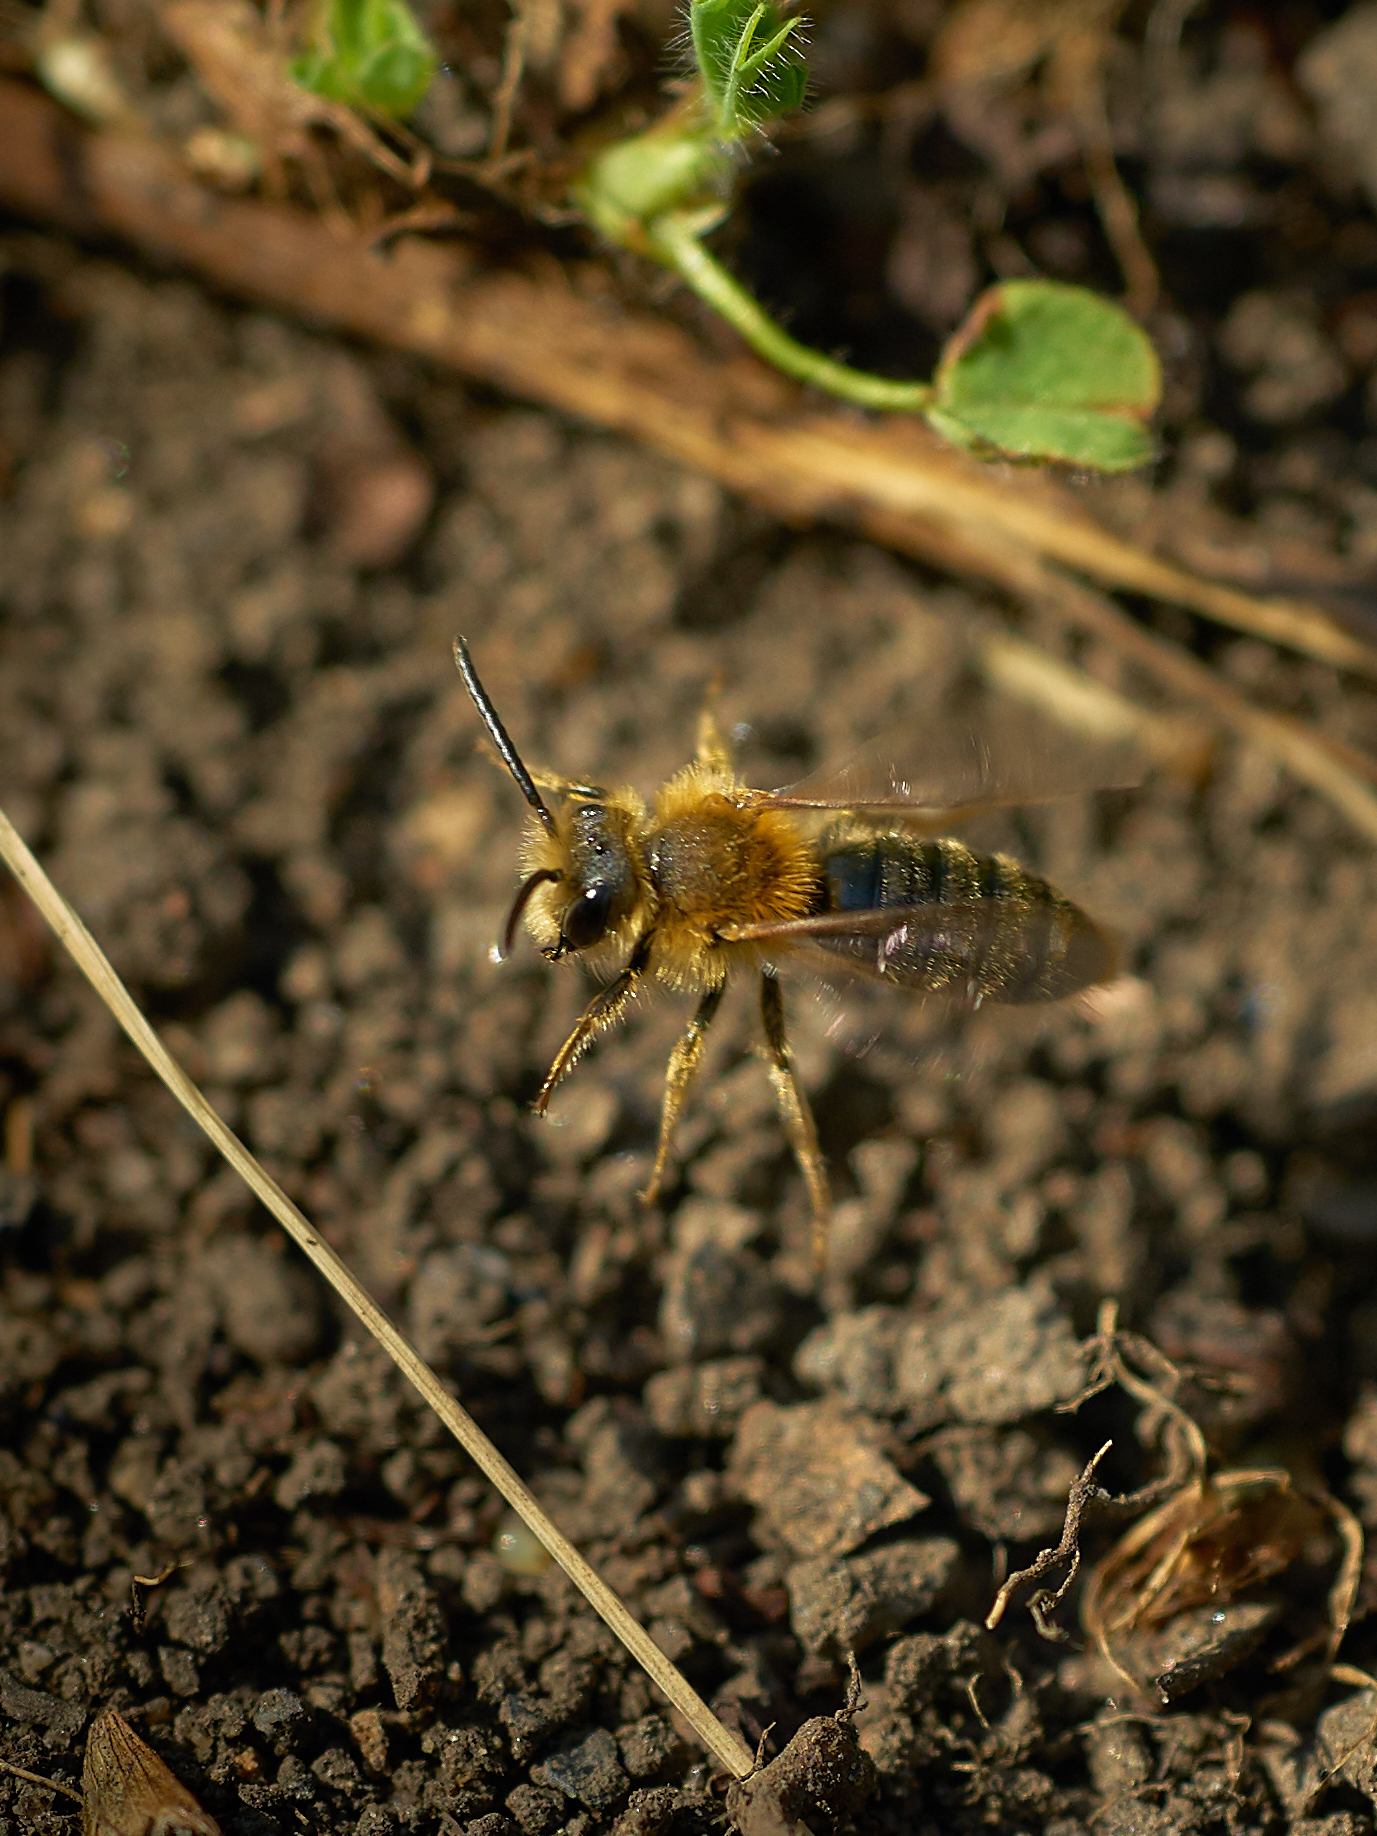 pic 2 male mining bee